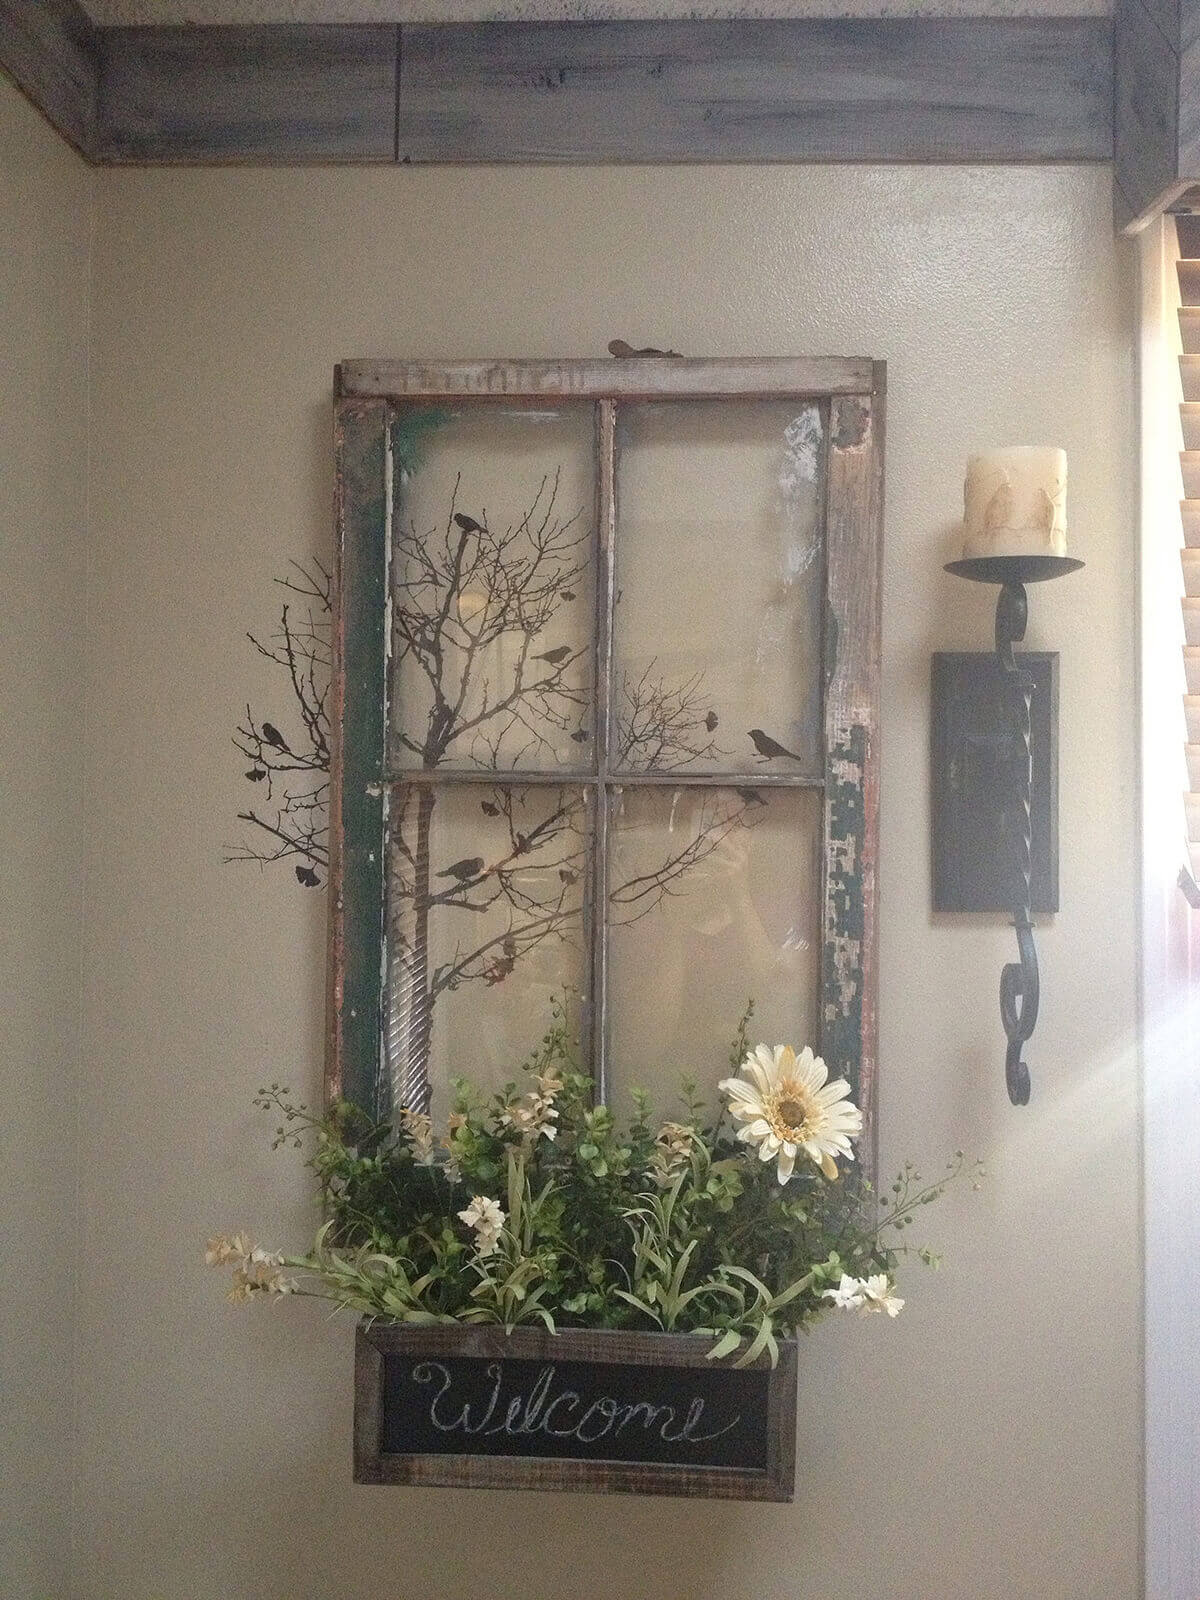 Repurposed Window Planter with a Sign